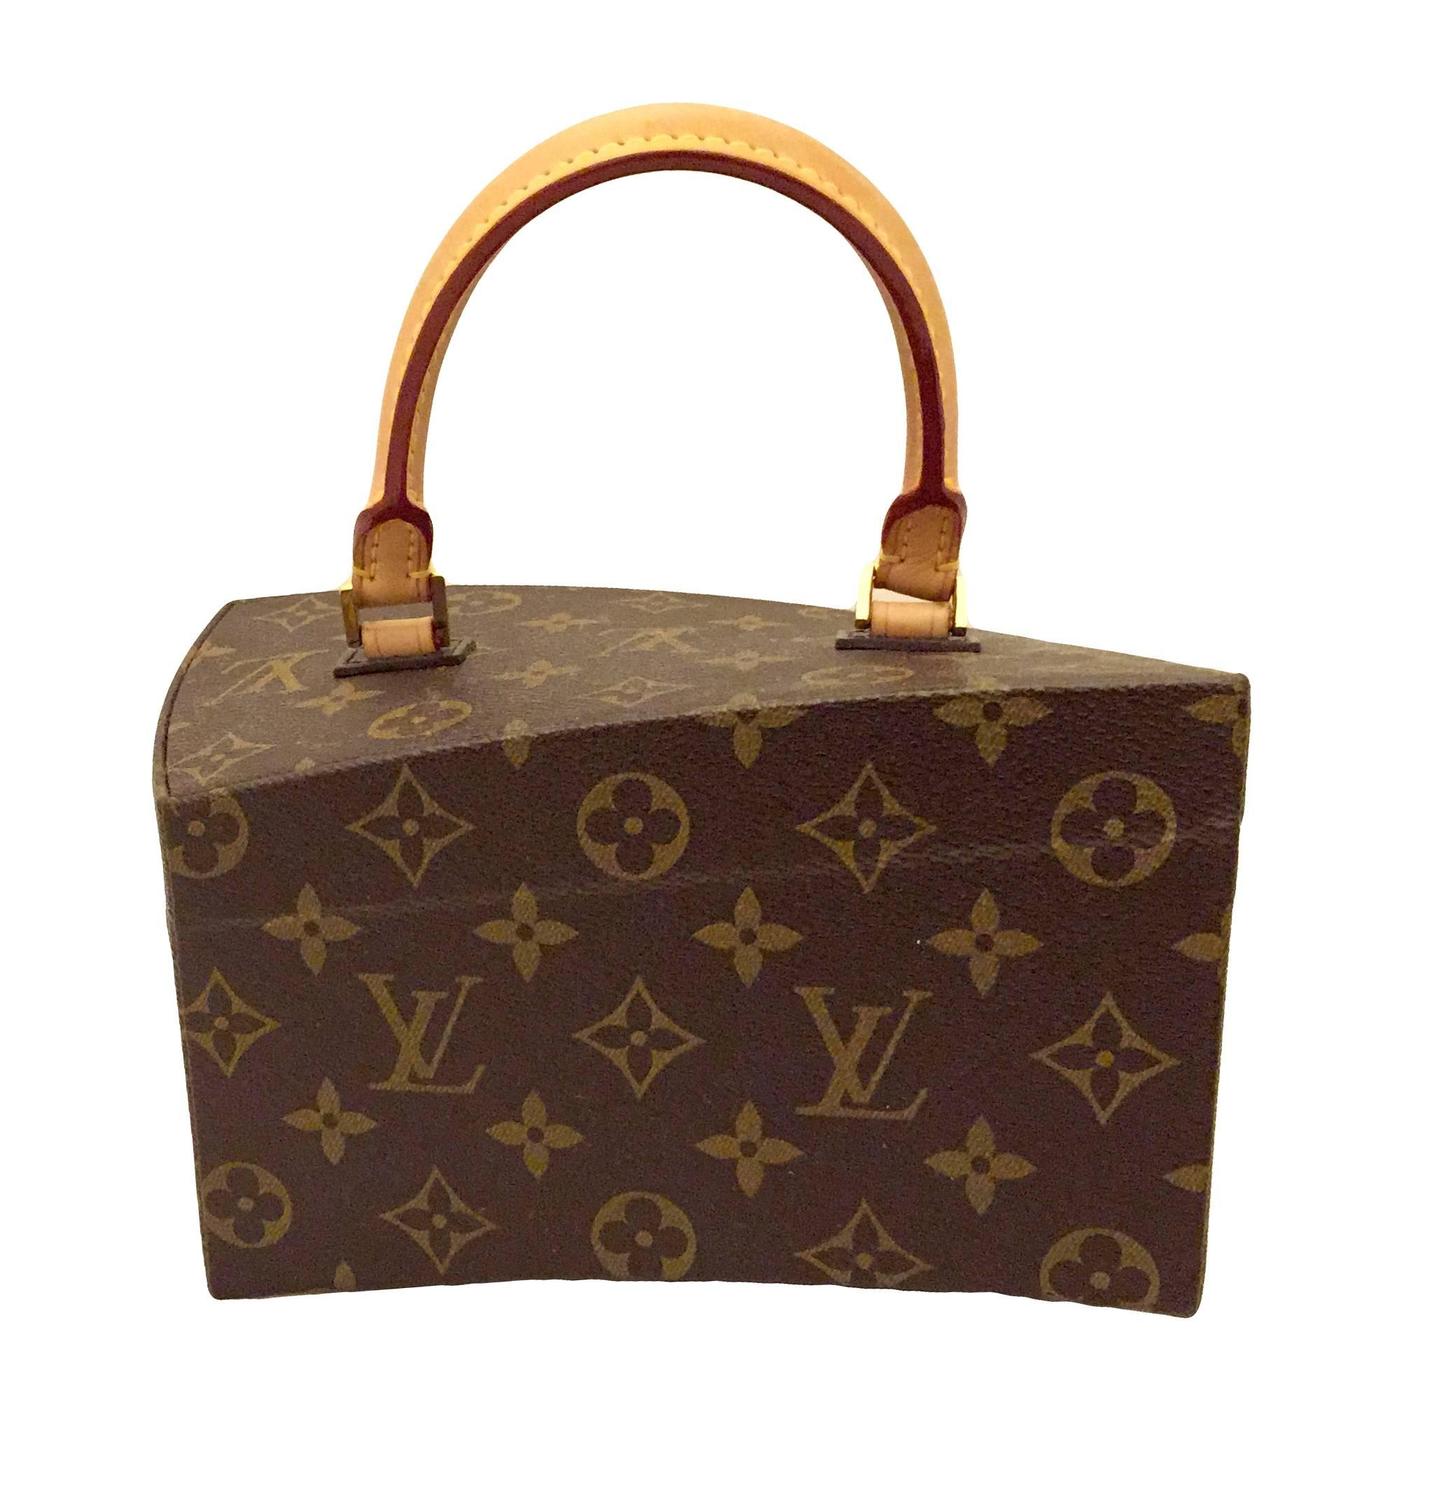 Iconic, rare Louis Vuitton Twisted Box Clutch by Frank Gehry at 1stdibs